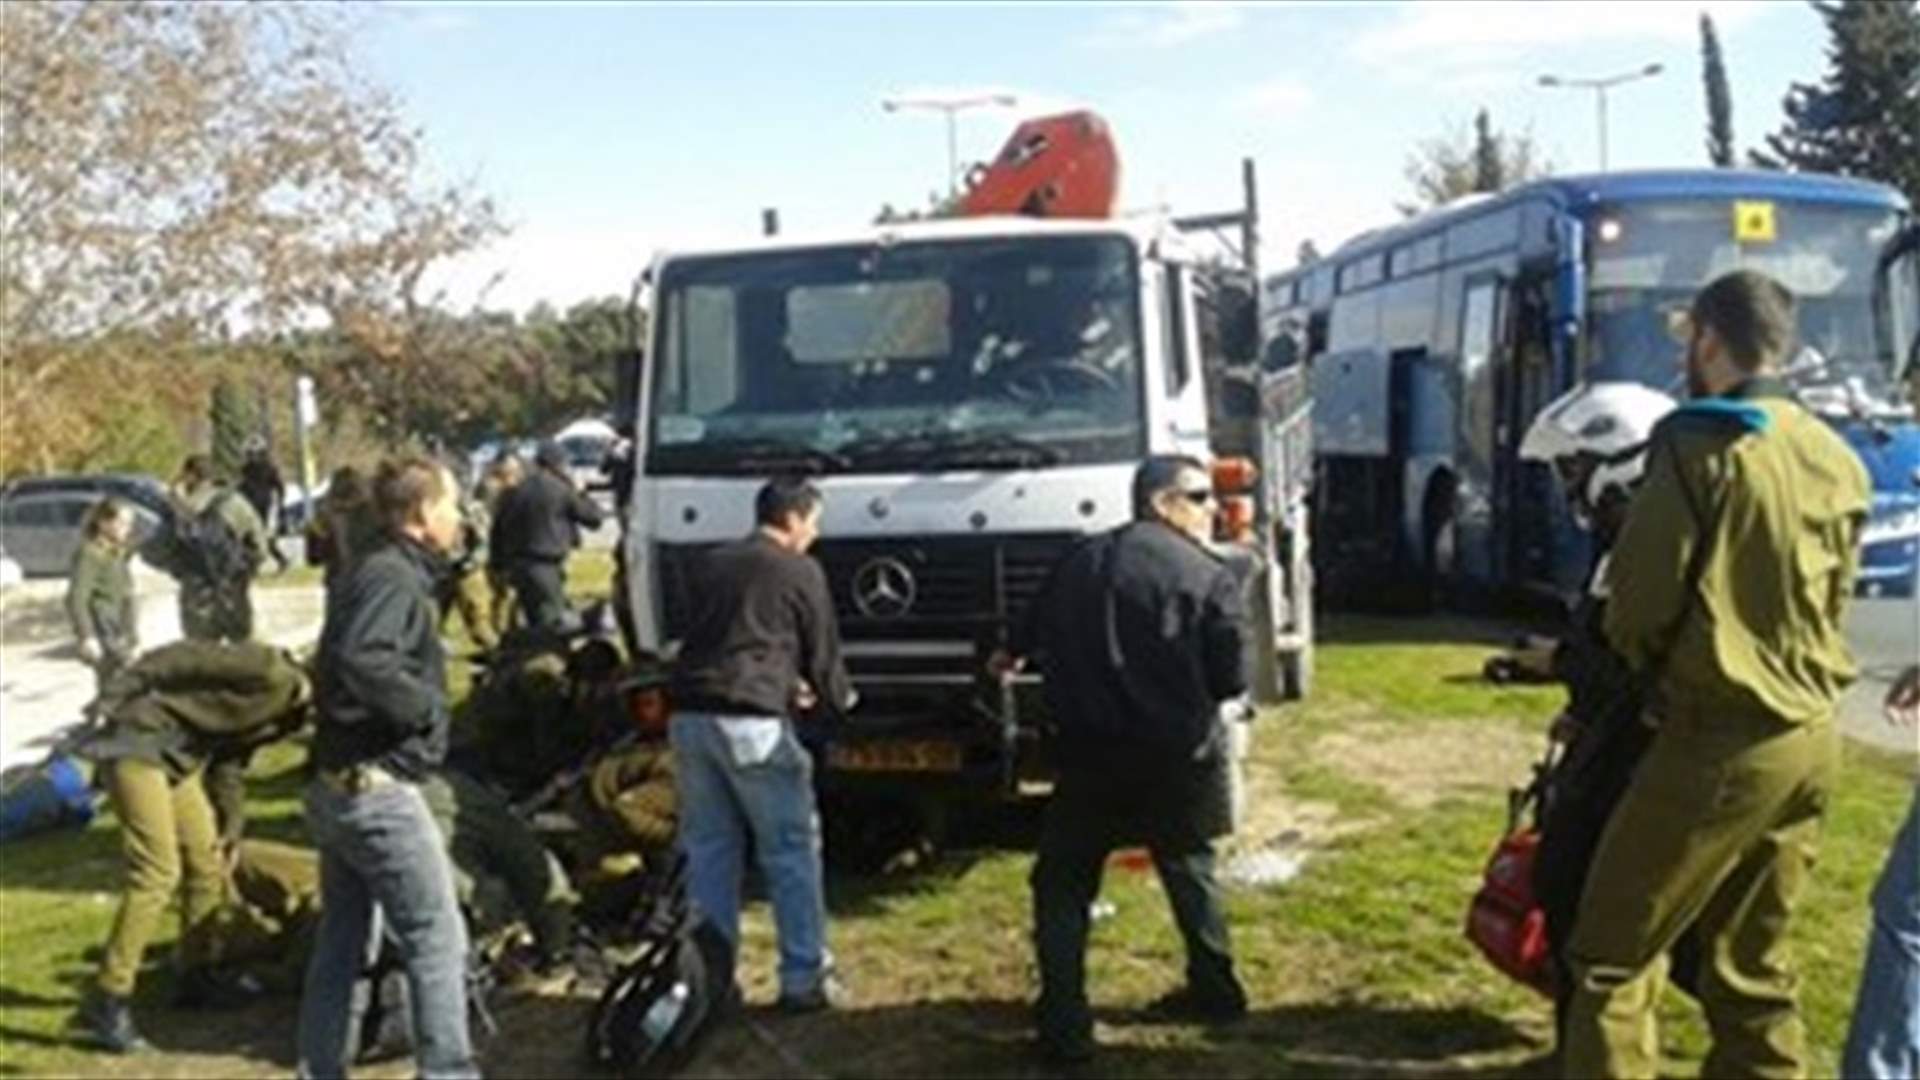 [VIDEO+PHOTOS] At least four dead in Palestinian truck-ramming attack in Jerusalem - police   